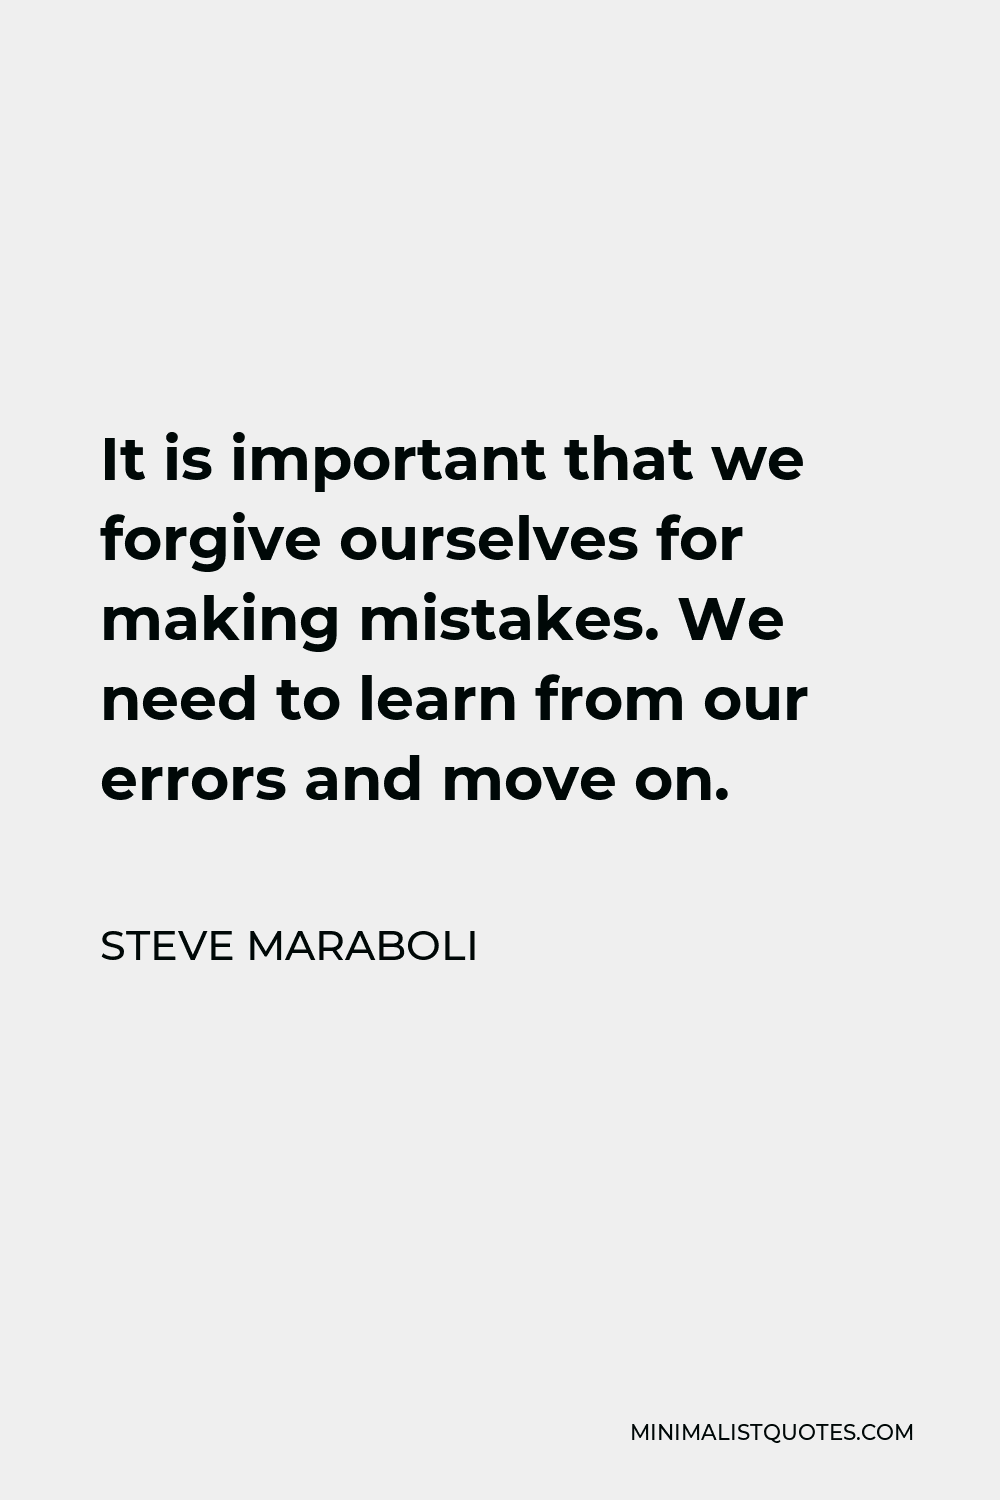 Steve Maraboli Quote - It is important that we forgive ourselves for making mistakes. We need to learn from our errors and move on.